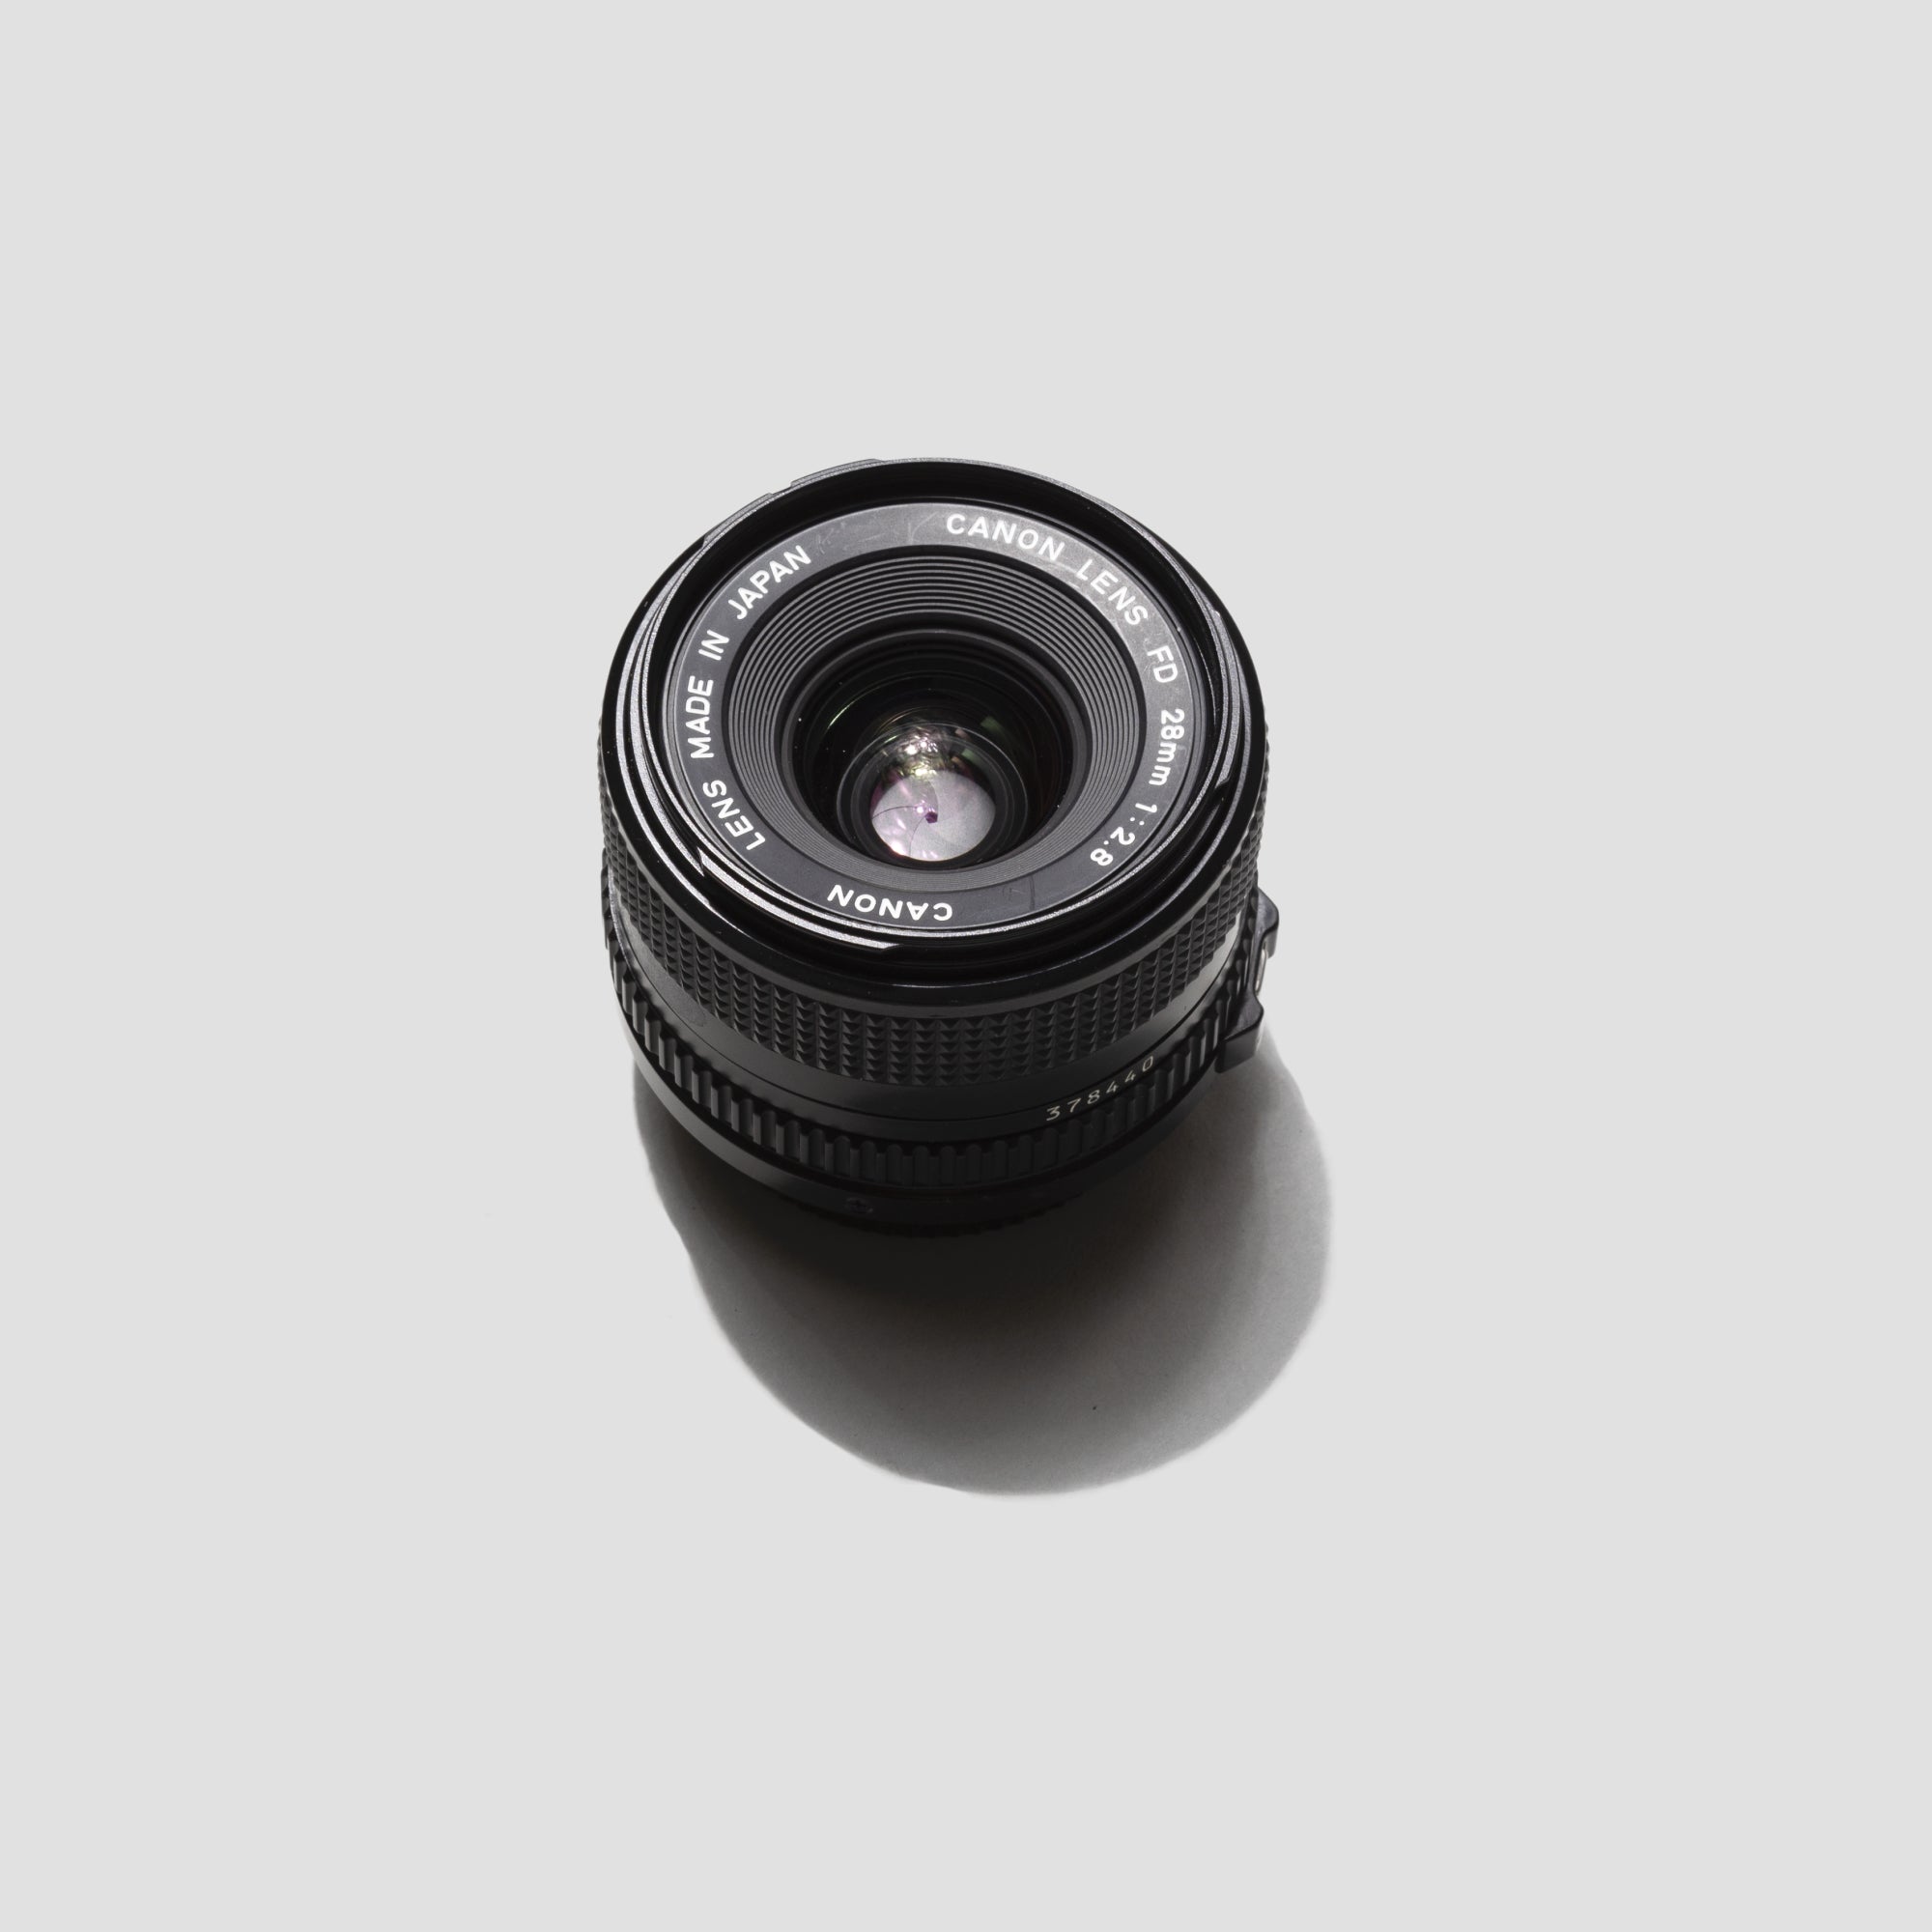 Buy Canon FD 28mm 2.8 now at Analogue Amsterdam